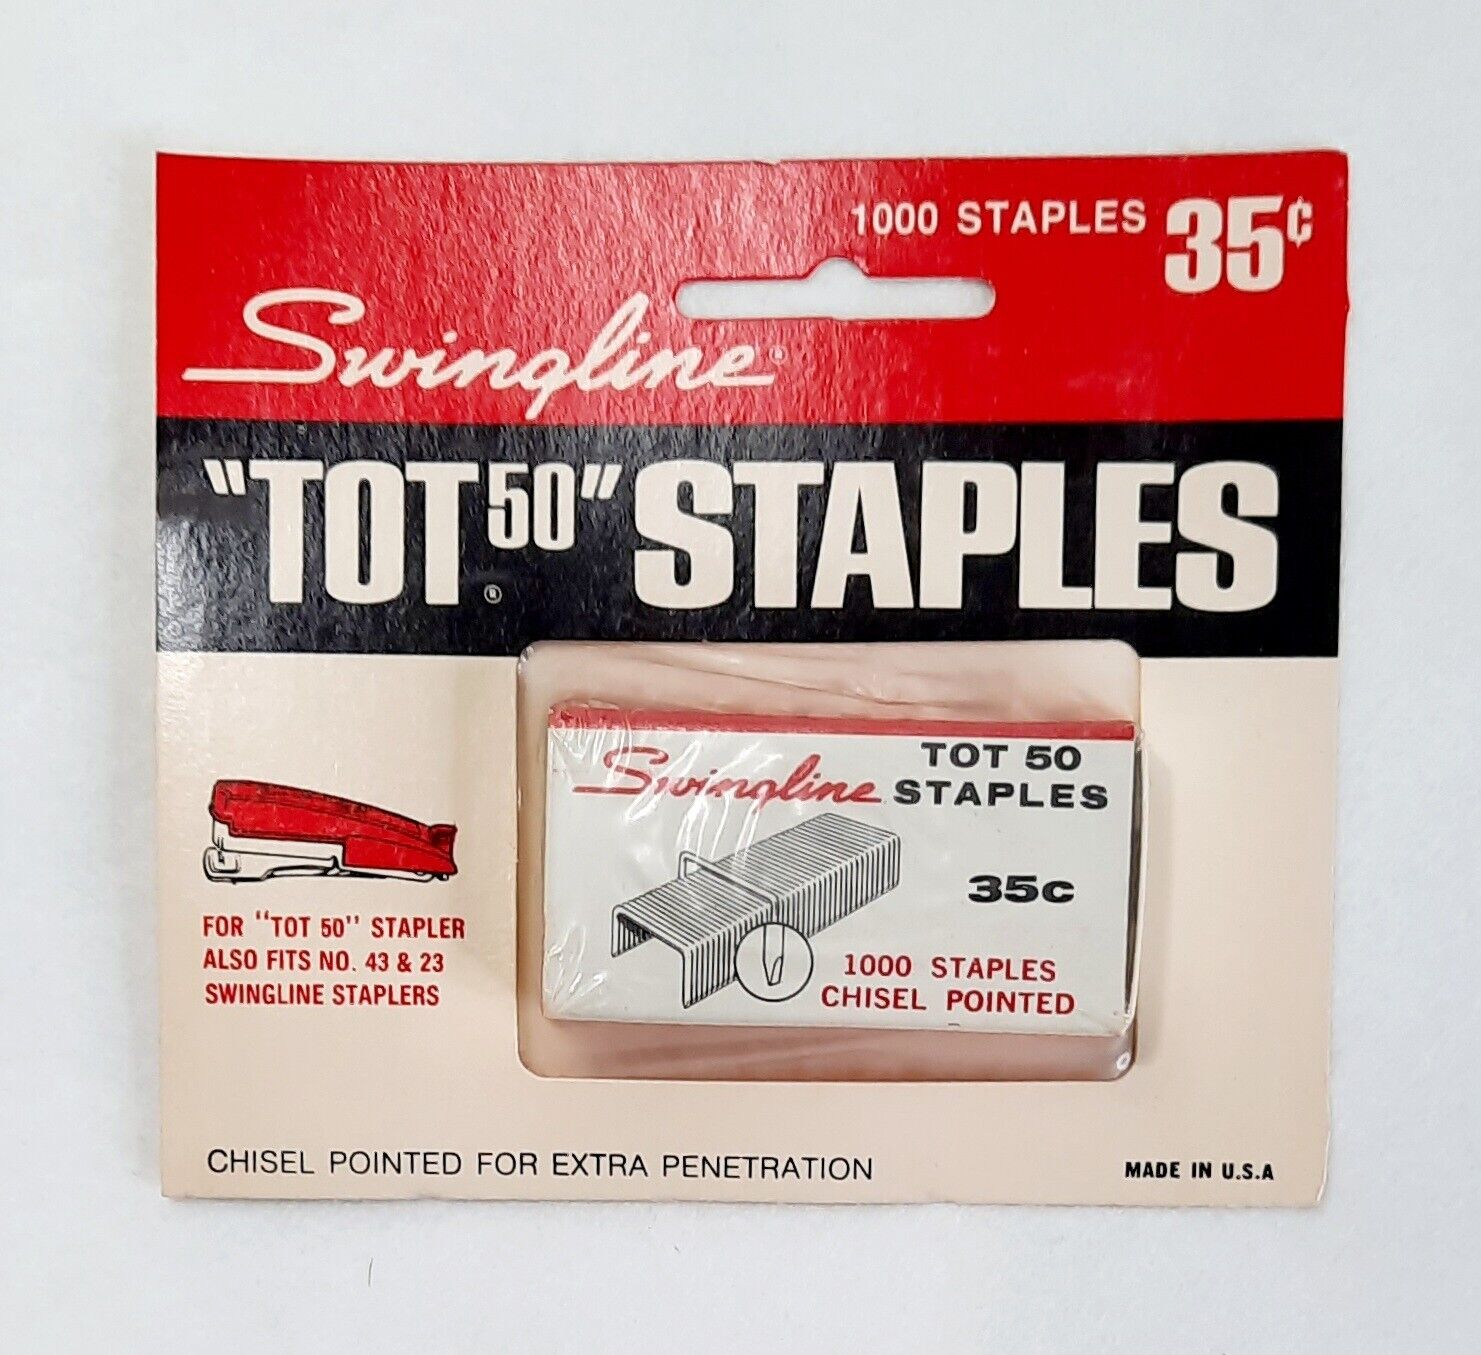 Swingline Tot 50 Staples 1000 Count Box Chisel Pointed New In Package VTG NOS